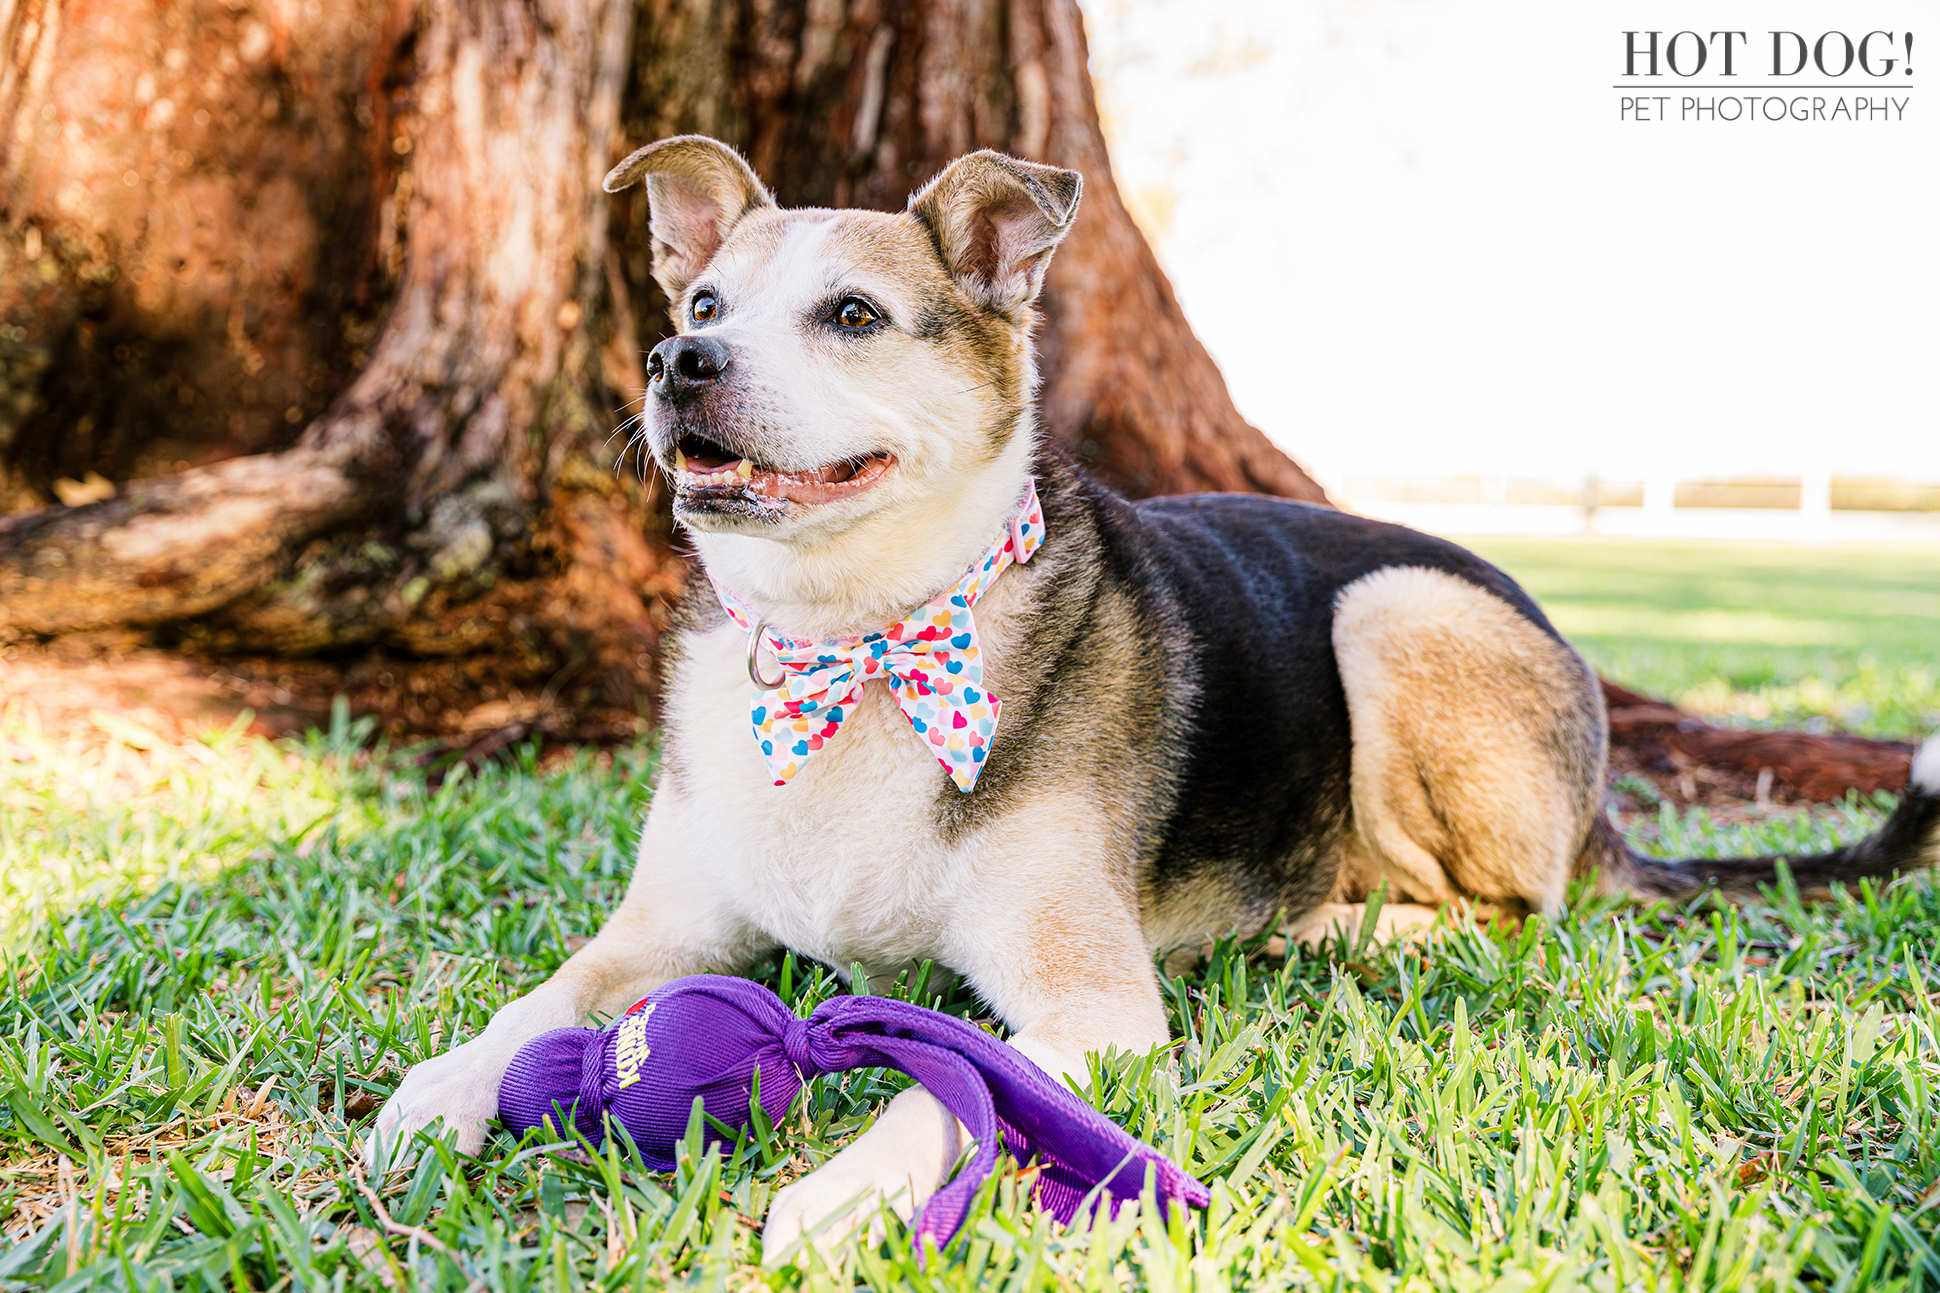 Senior rescue dog Zoe having her portrait taken with her favorite toy by Hot Dog! Pet Photography.